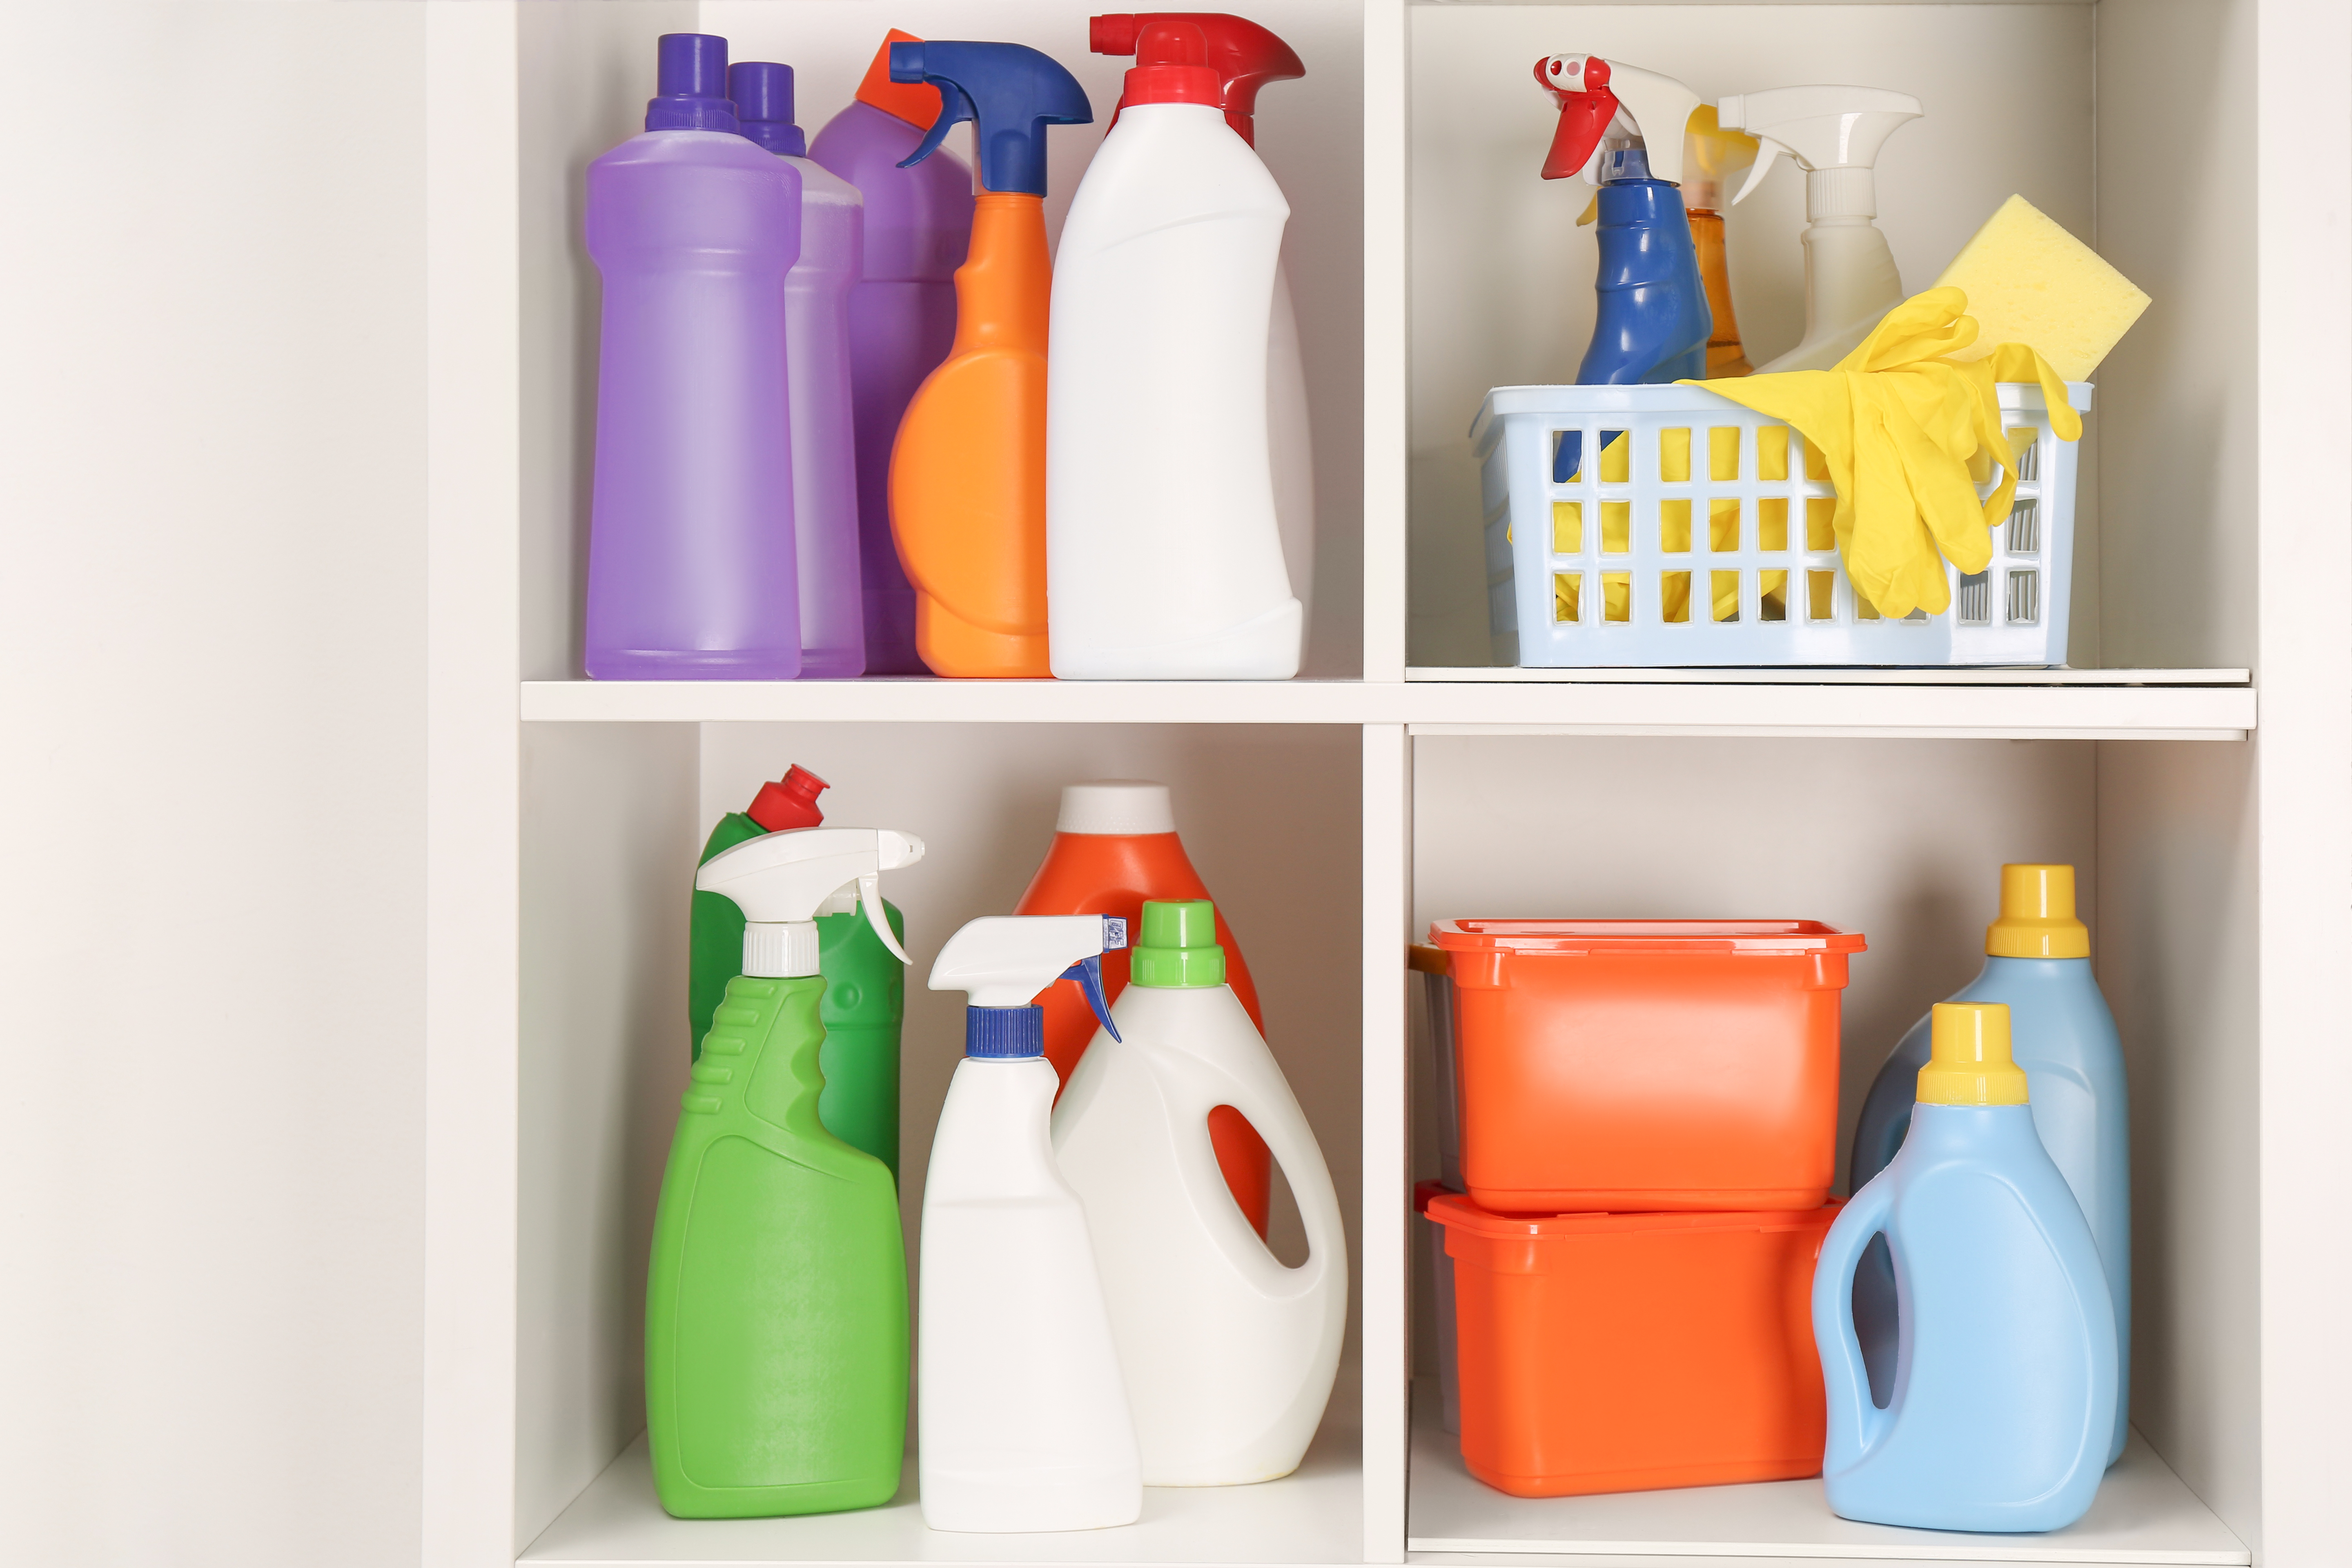 Bleach and Vinegar: Effective Cleaning Tools That Turn Lethal Together